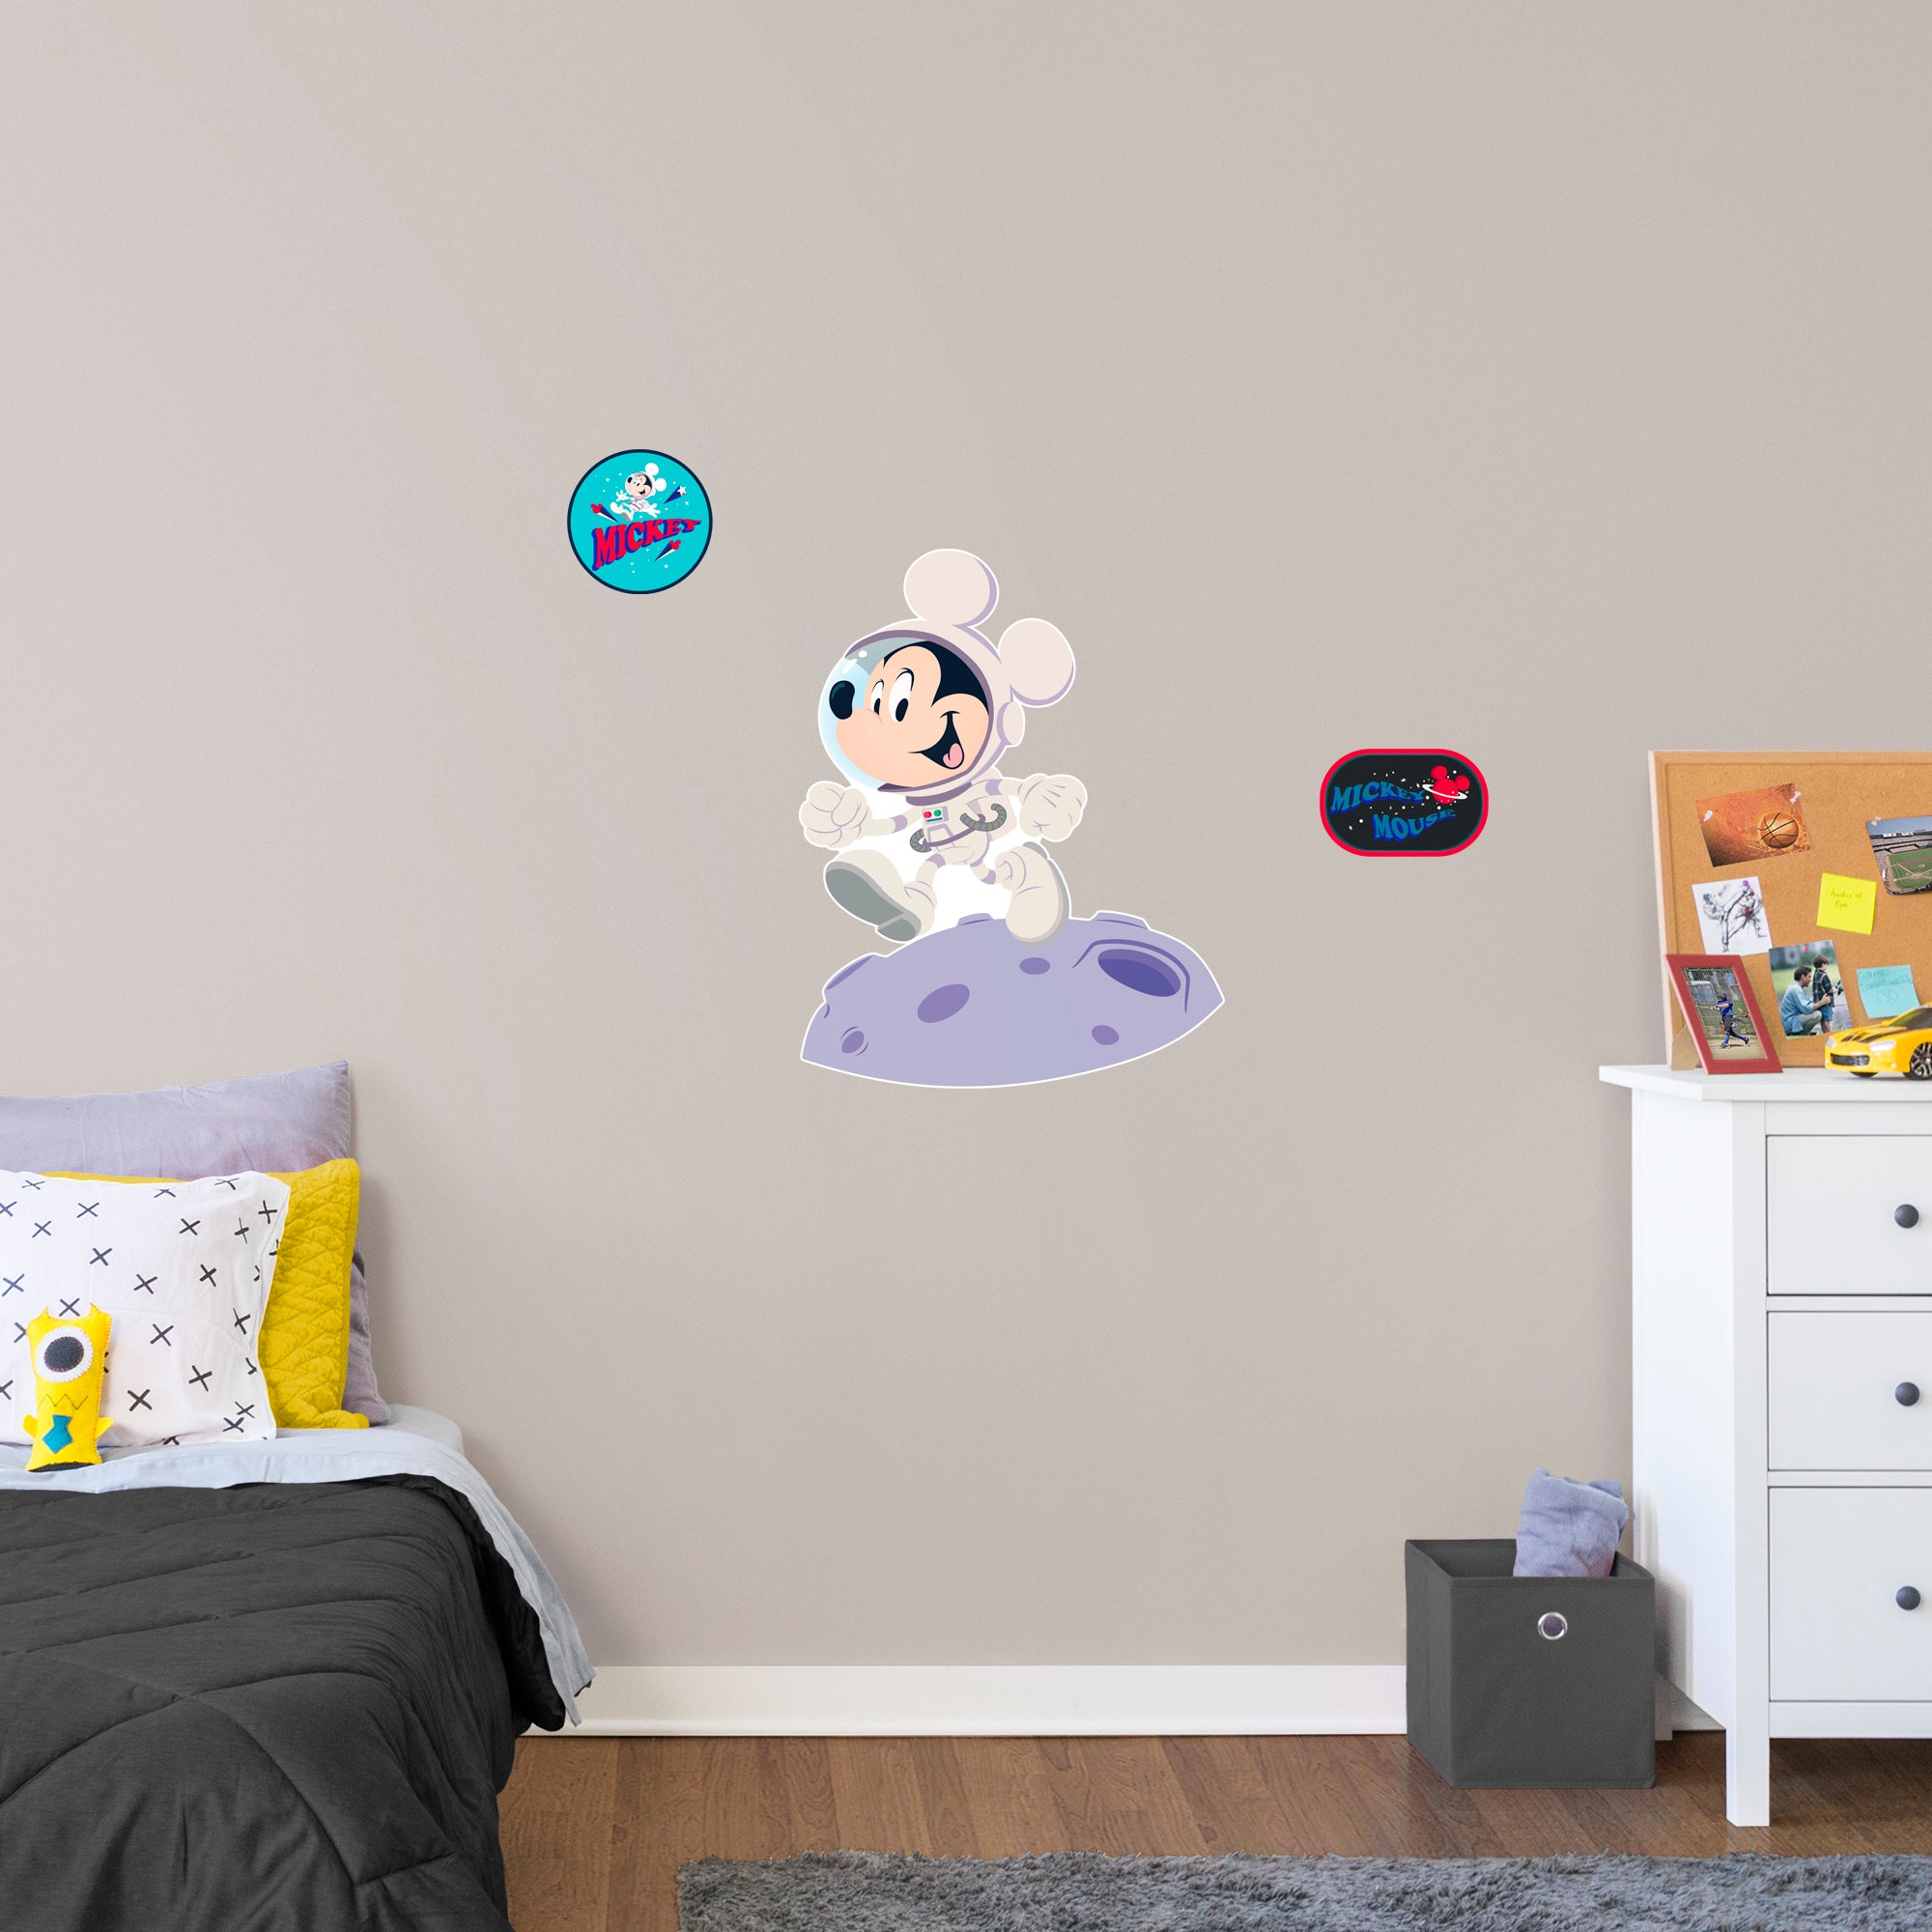 Mickey Mouse on the Moon - Officially Licensed Disney Removable Wall Decal XL by Fathead | Vinyl